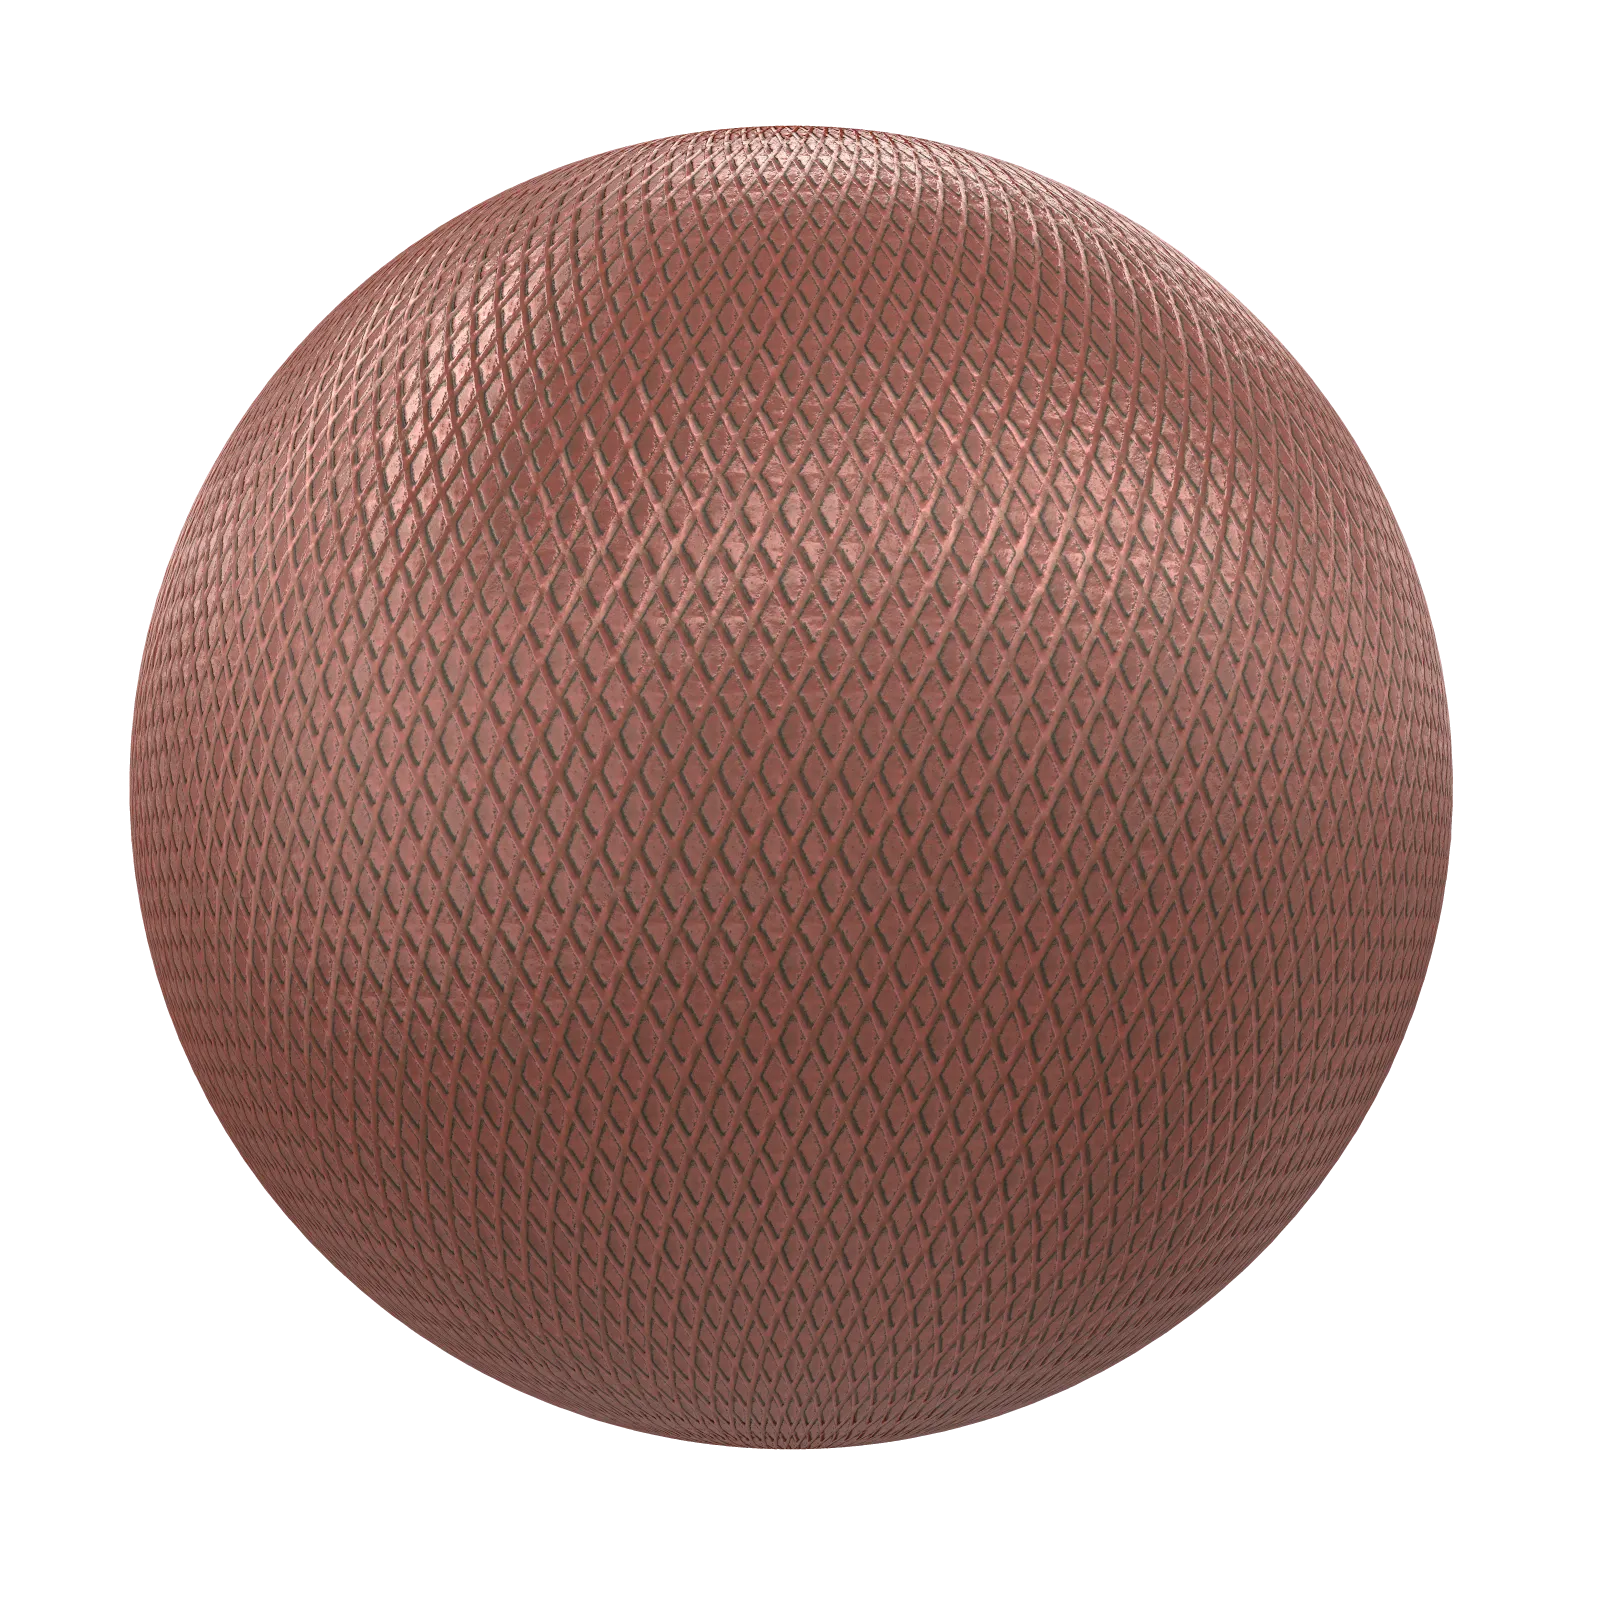 PBR CGAXIS TEXTURES – METALS – Rusty Patterned Metal 01